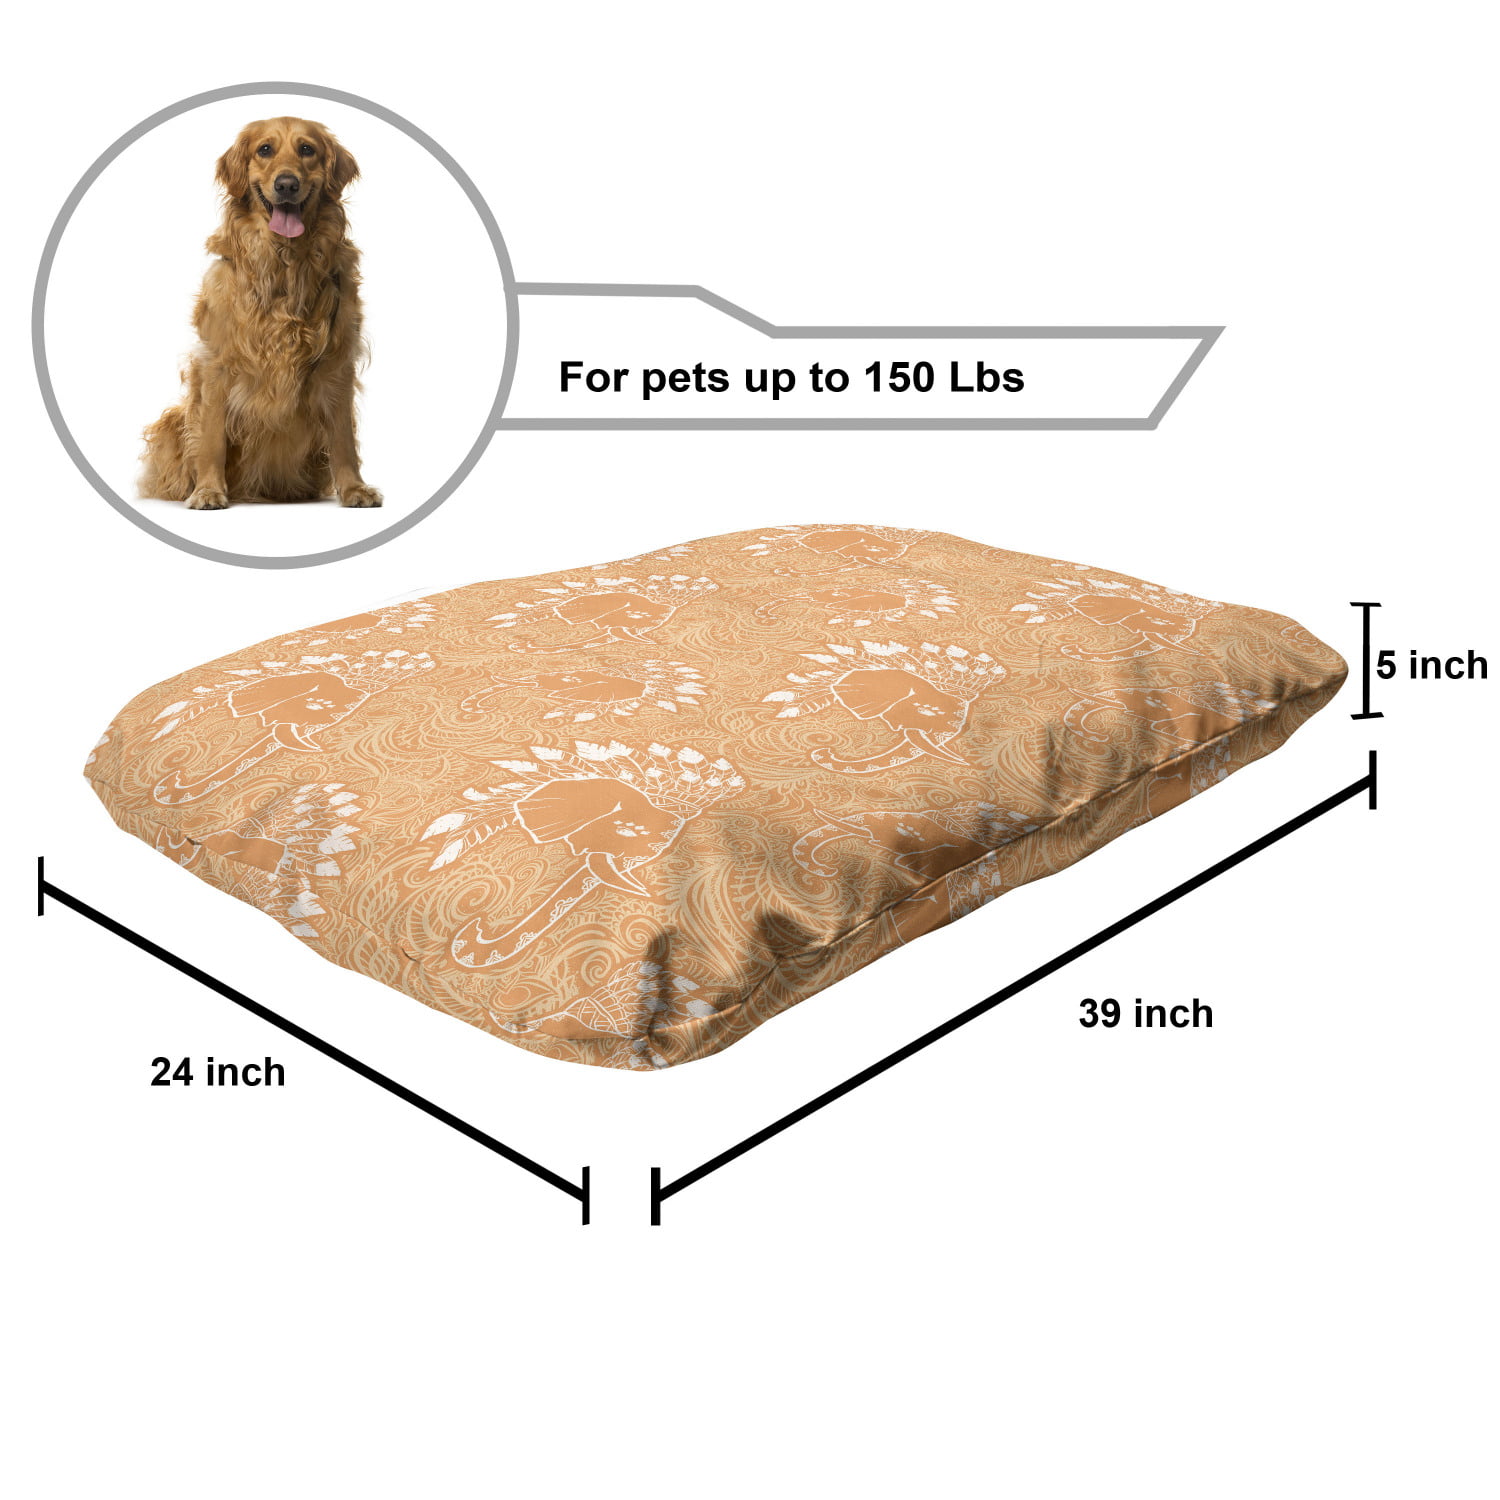 Boho Pet Bed, Hat with Feathers and Ornaments, Chew Resistant Pad for Dogs  and Cats Cushion with Removable Cover, 24 x 39, Pale Orange White, by  Ambesonne 